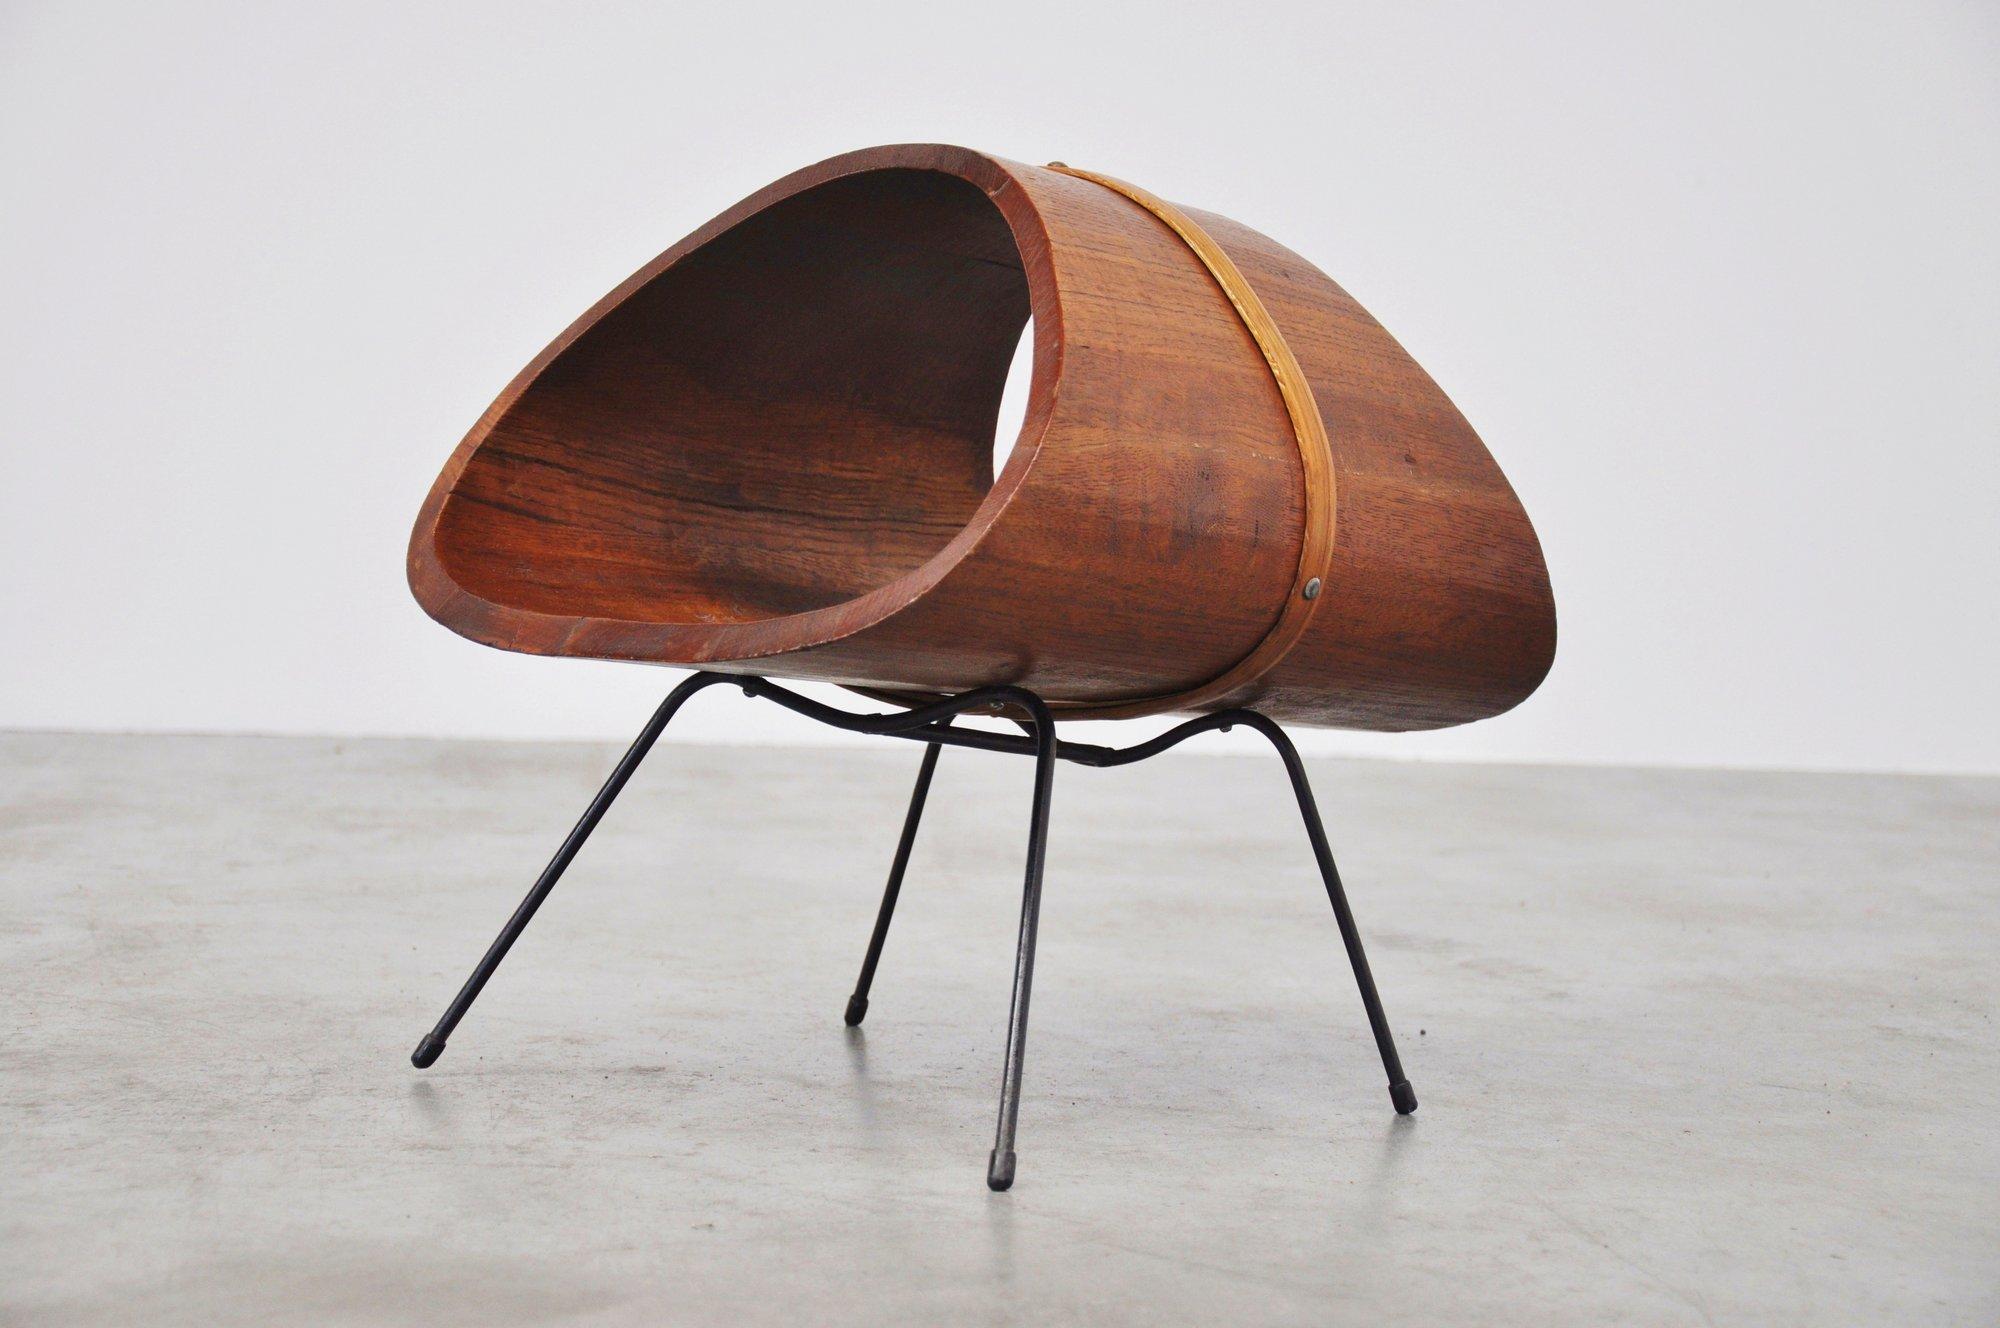 Fantastic dynamic shaped magazine stand, Vienna 1956. This cool magazine stand was made of a massive wooden parts and was finished with a wooden slat and brass nails. The frame is black lacquered metal. This magazine rack is more like some kind of a